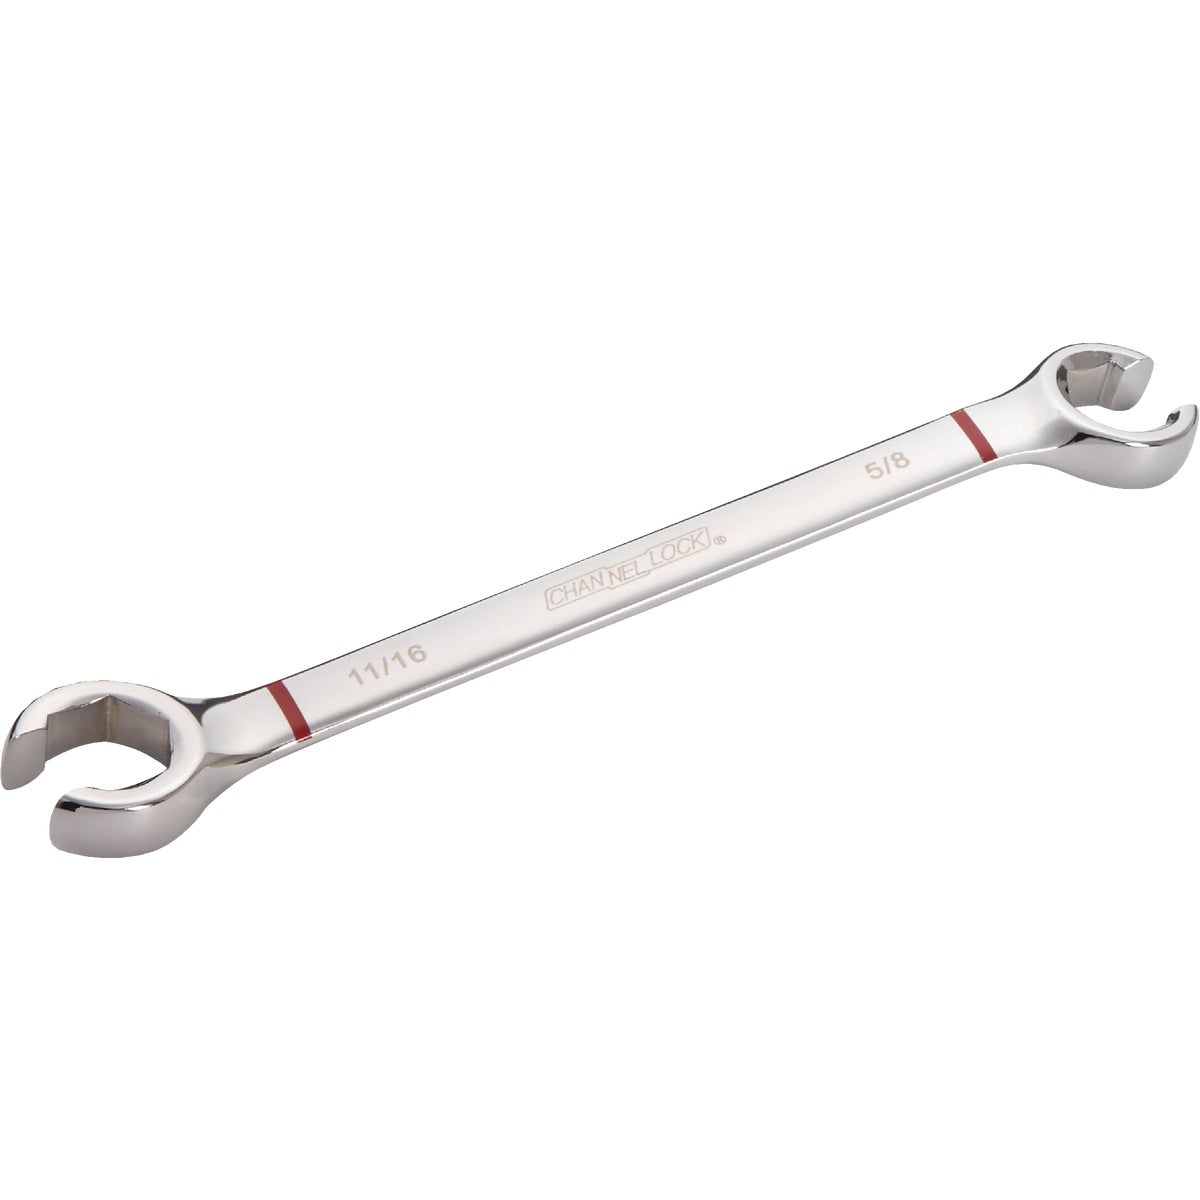 Channellock Standard 5/8 In. x 11/16 In. 6-Point Flare Nut Wrench